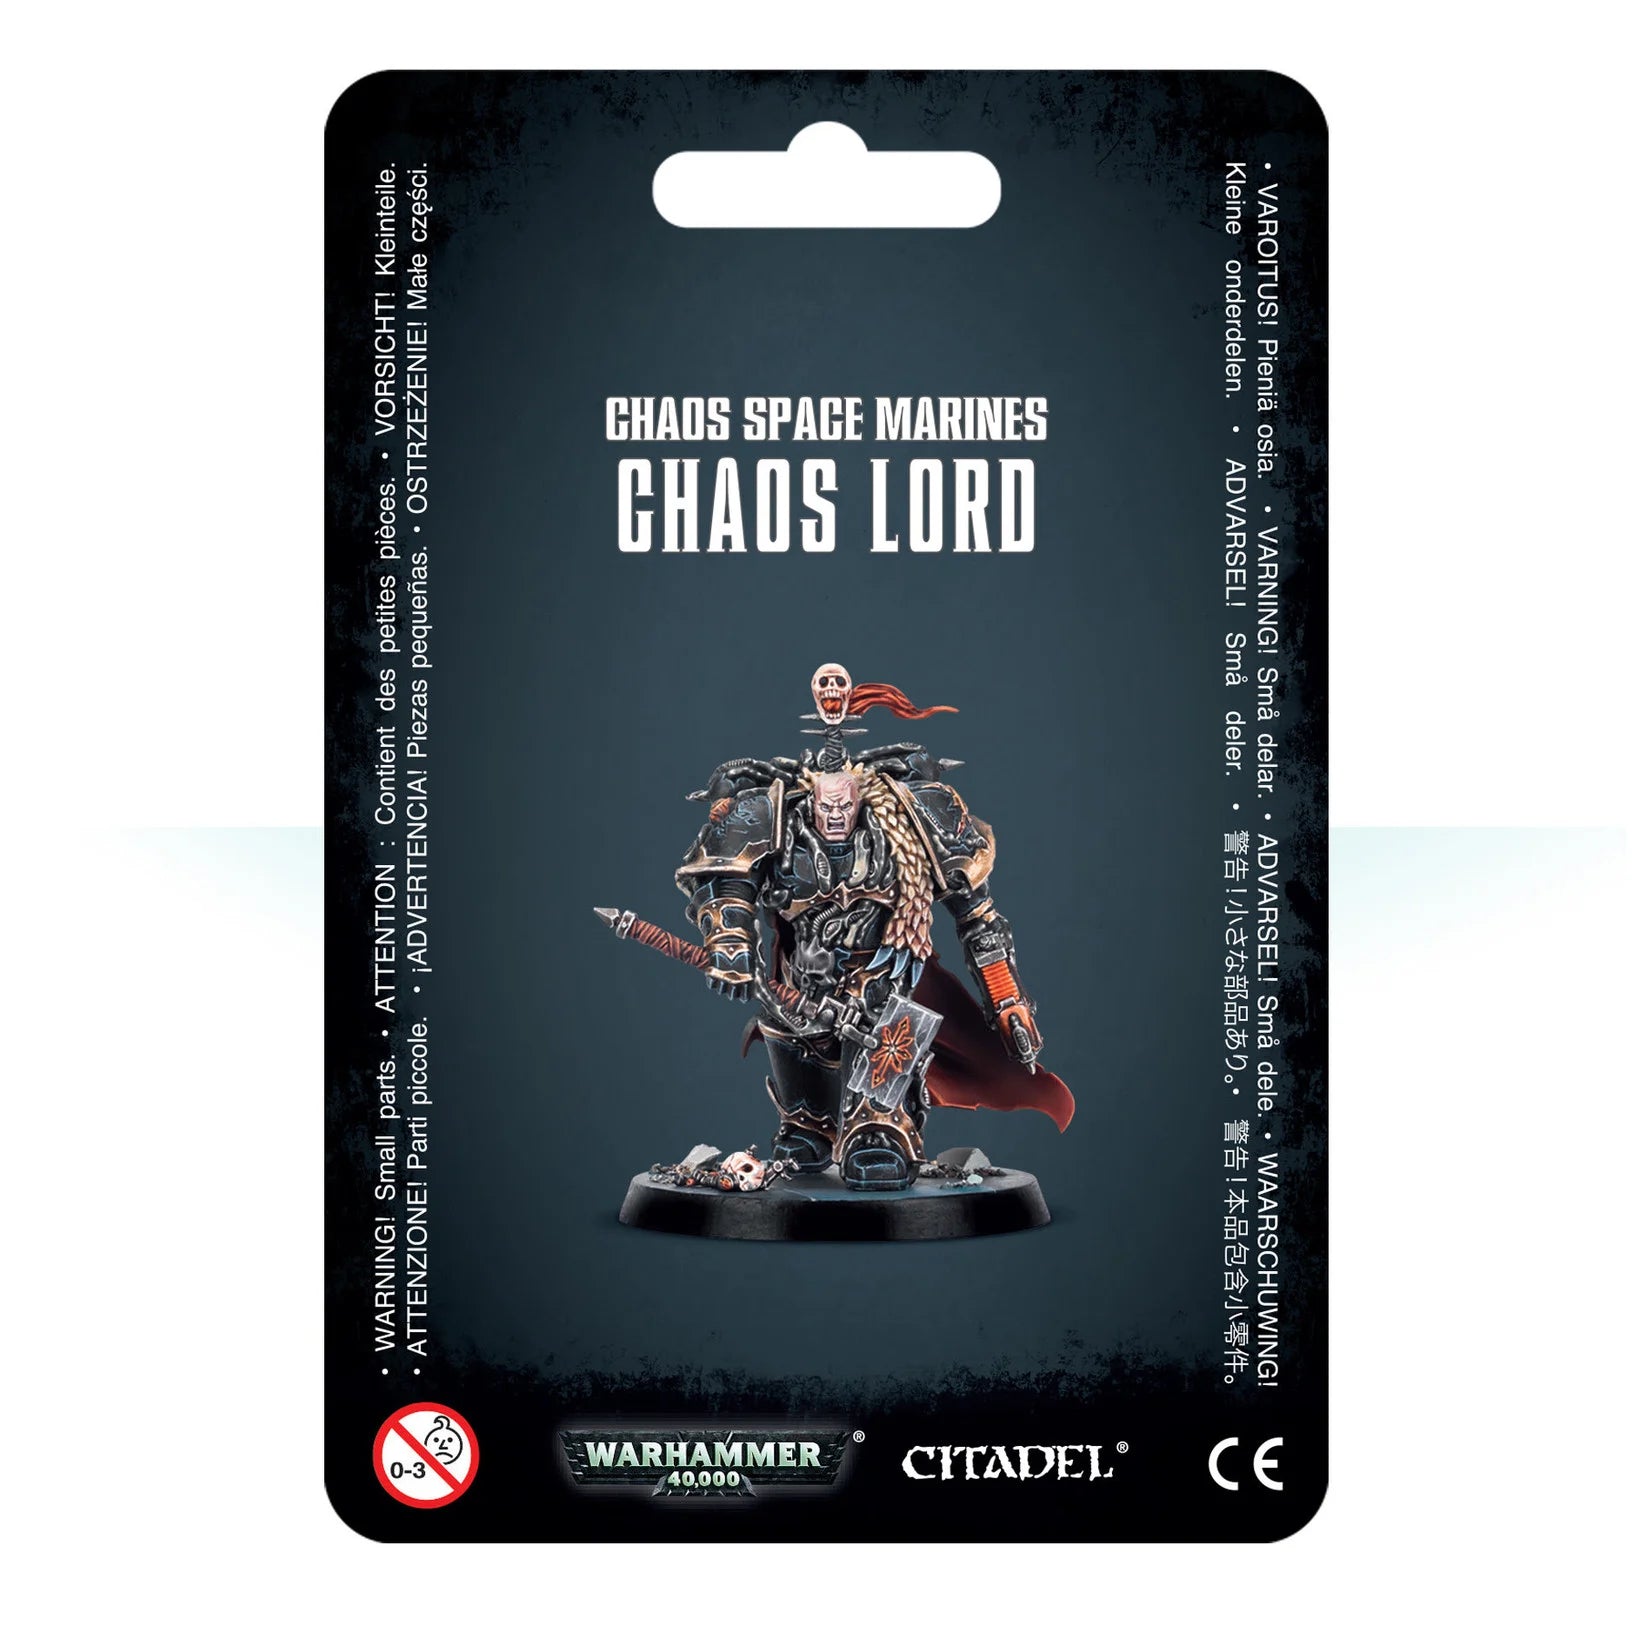 Chaos Space Marines: Chaos Lord - Loaded Dice Barry Vale of Glamorgan CF64 3HD